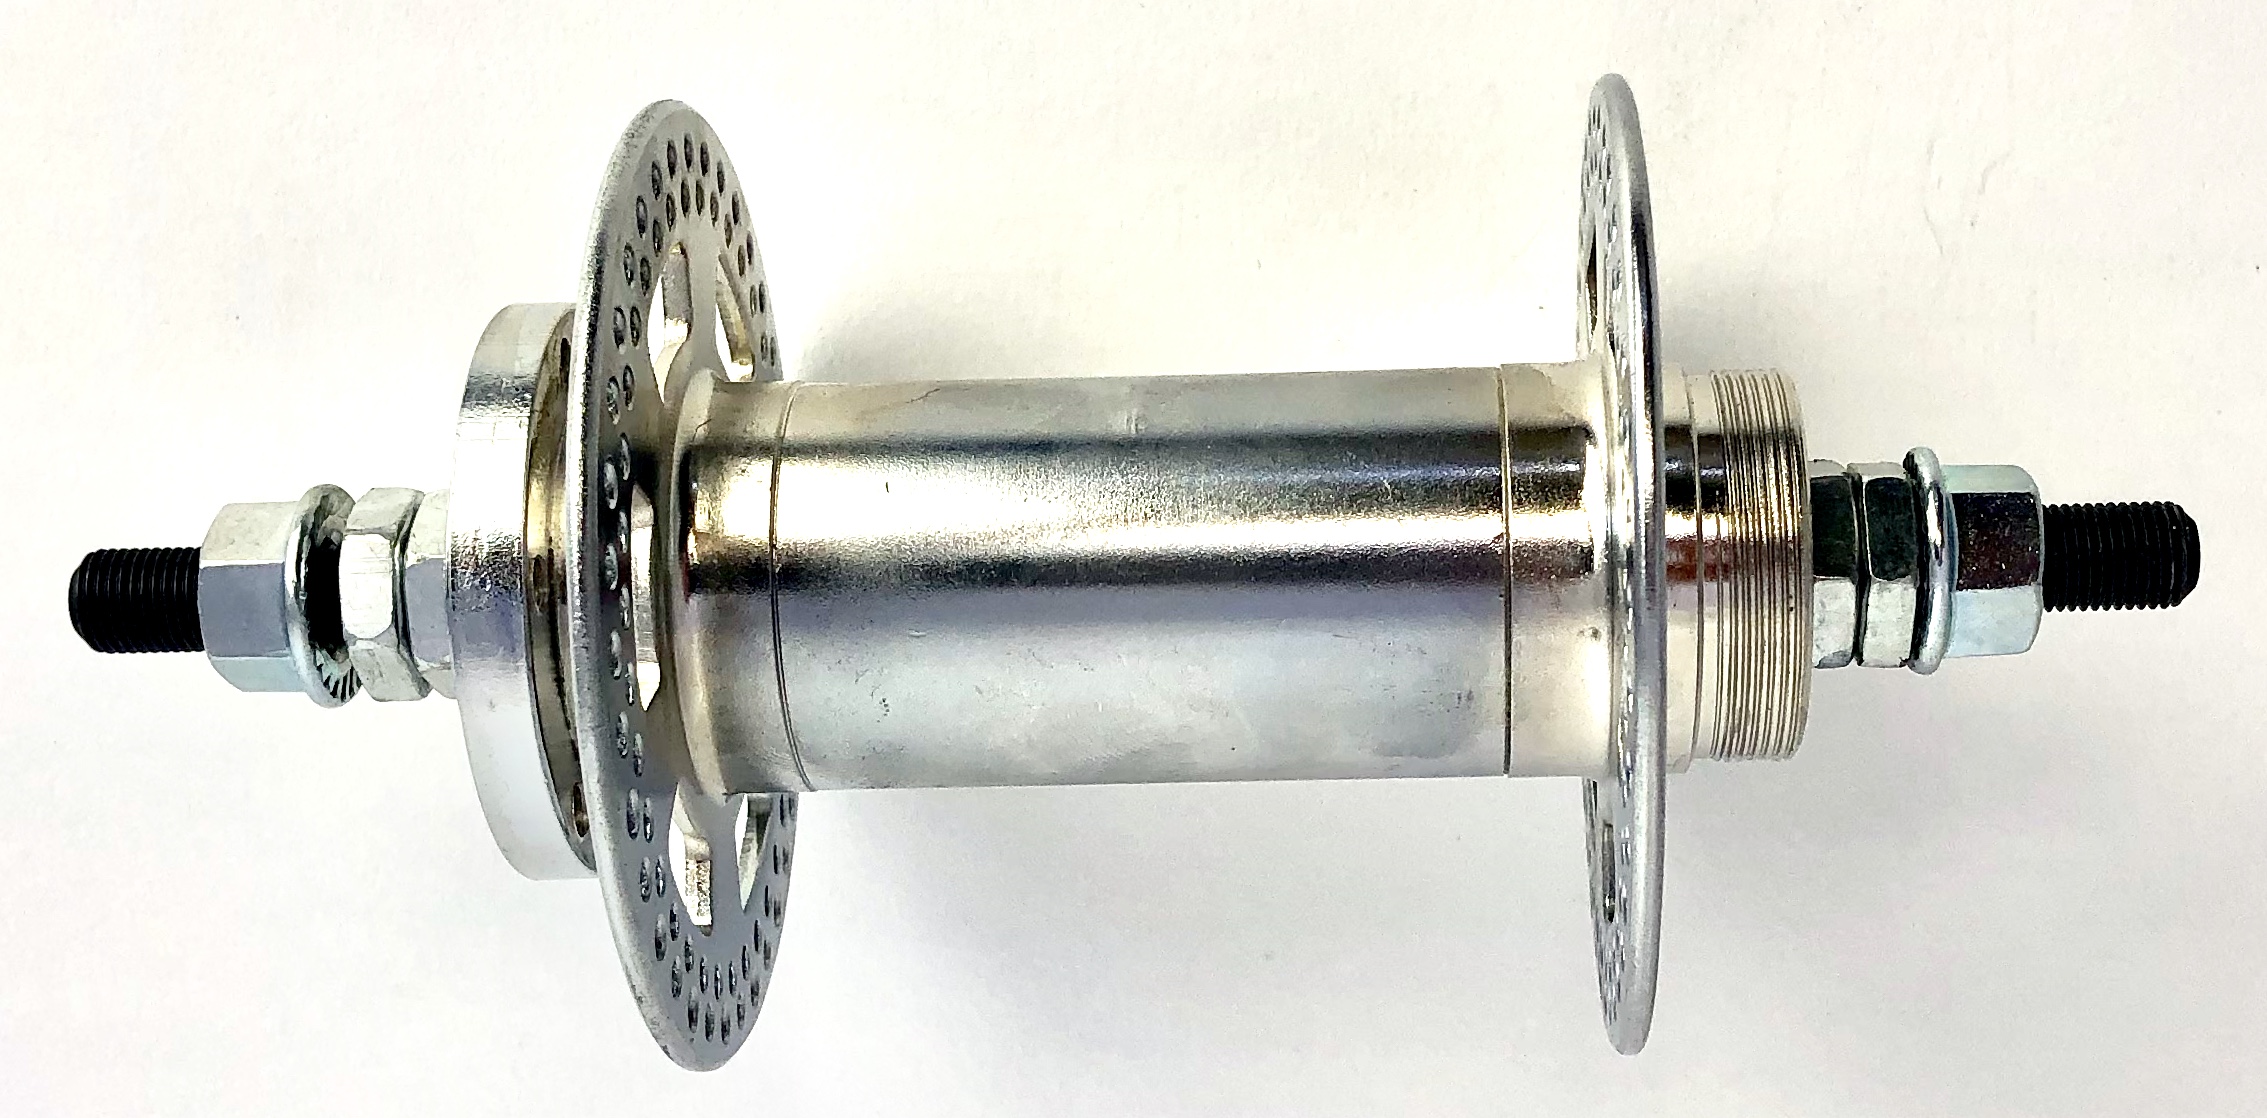 Extra wide Rear Hub for 100mm rims for Disc Brakes, 144 holes